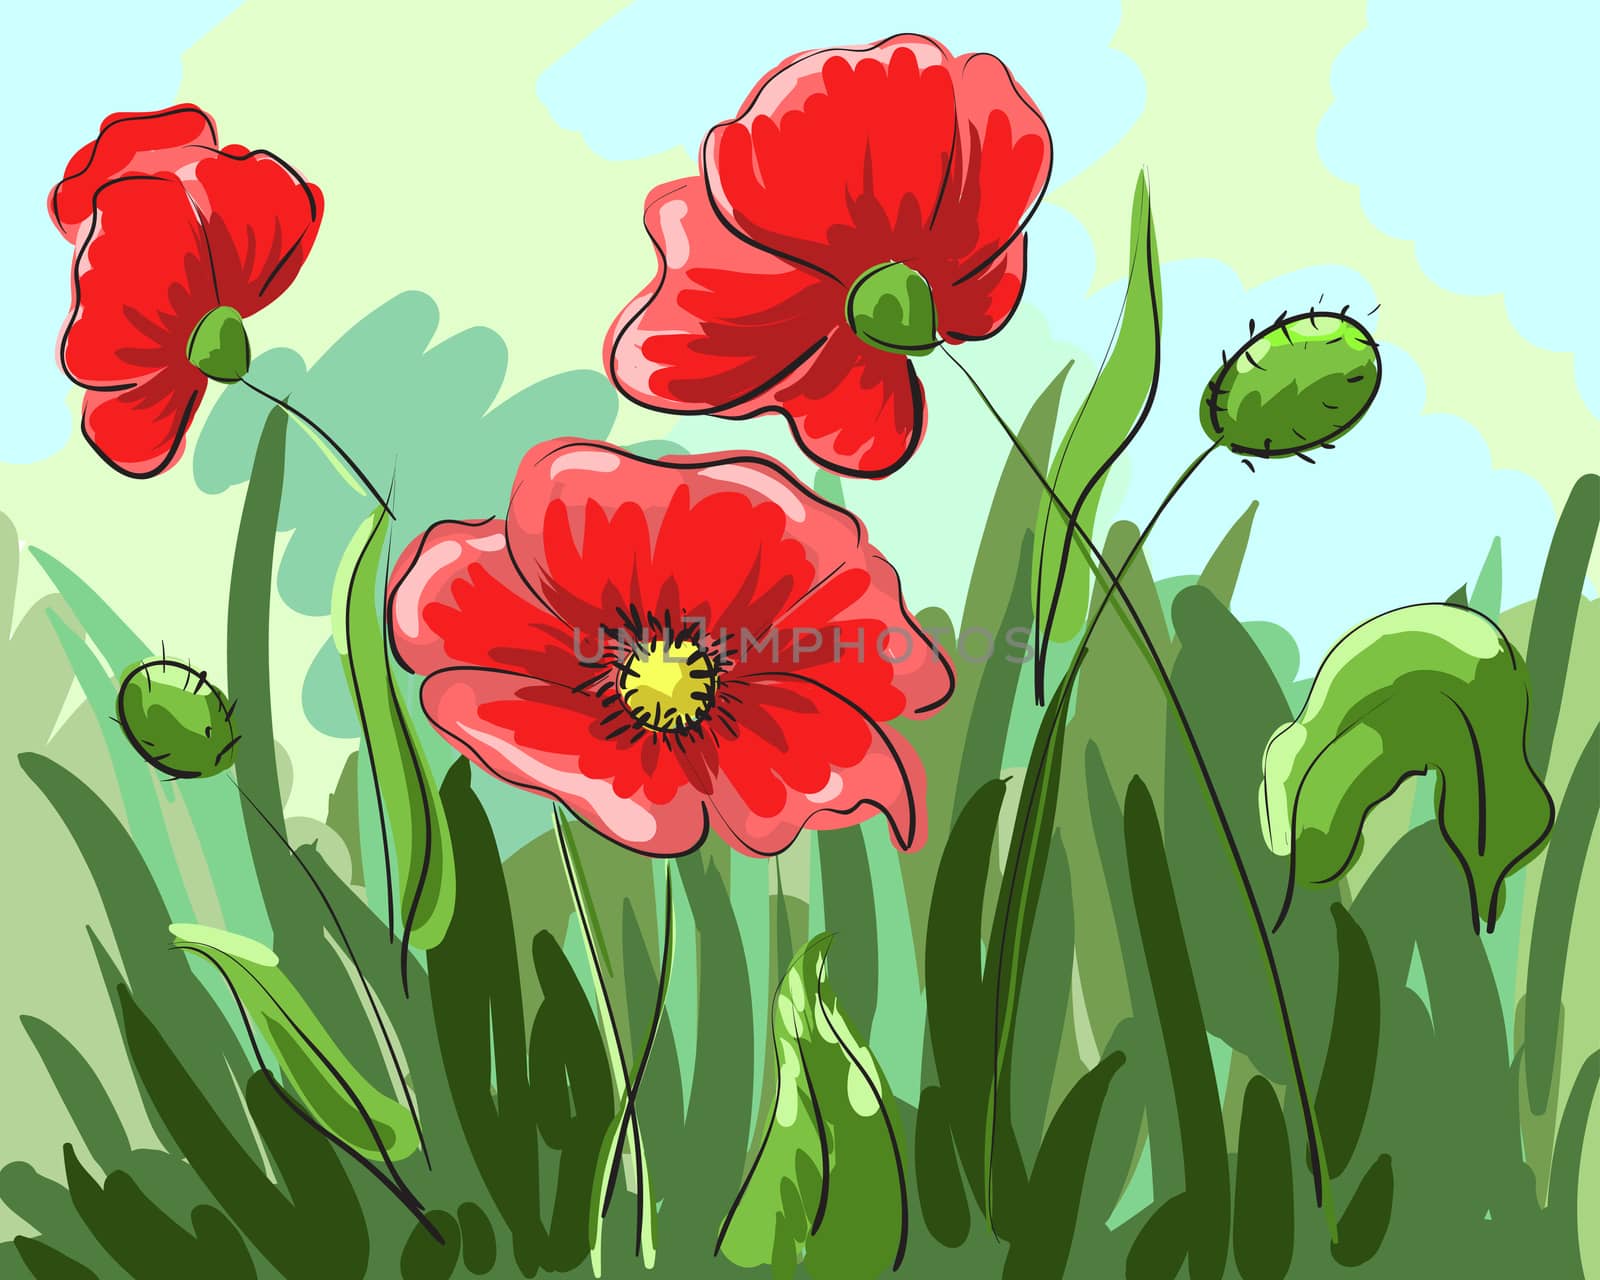 red poppies painted by hand grow on the field with green leaves. by Adamchuk